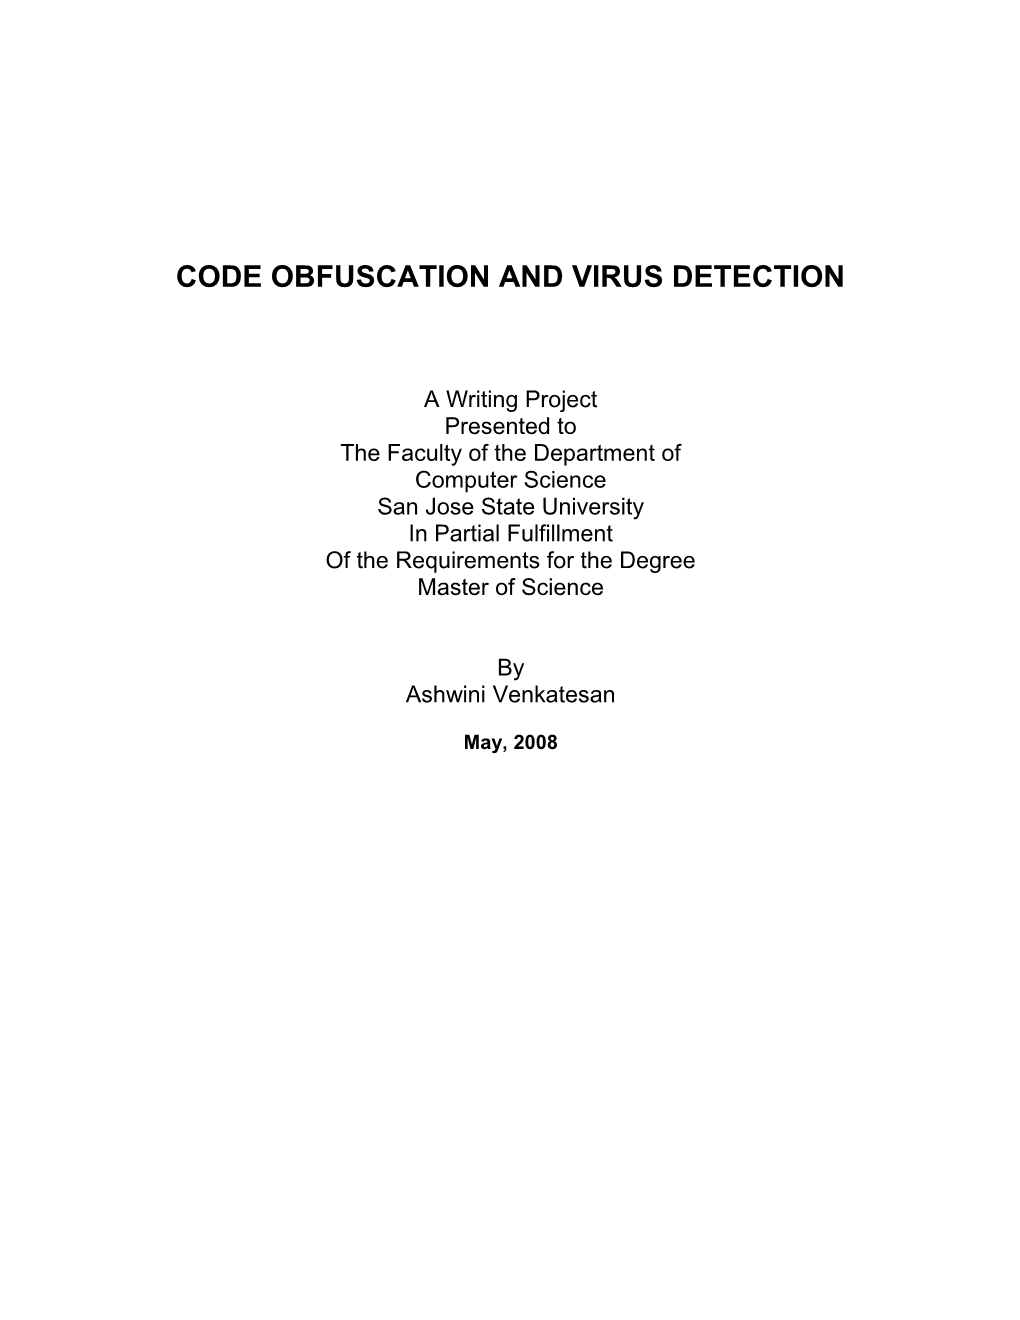 Code Obfuscation and Virus Detection